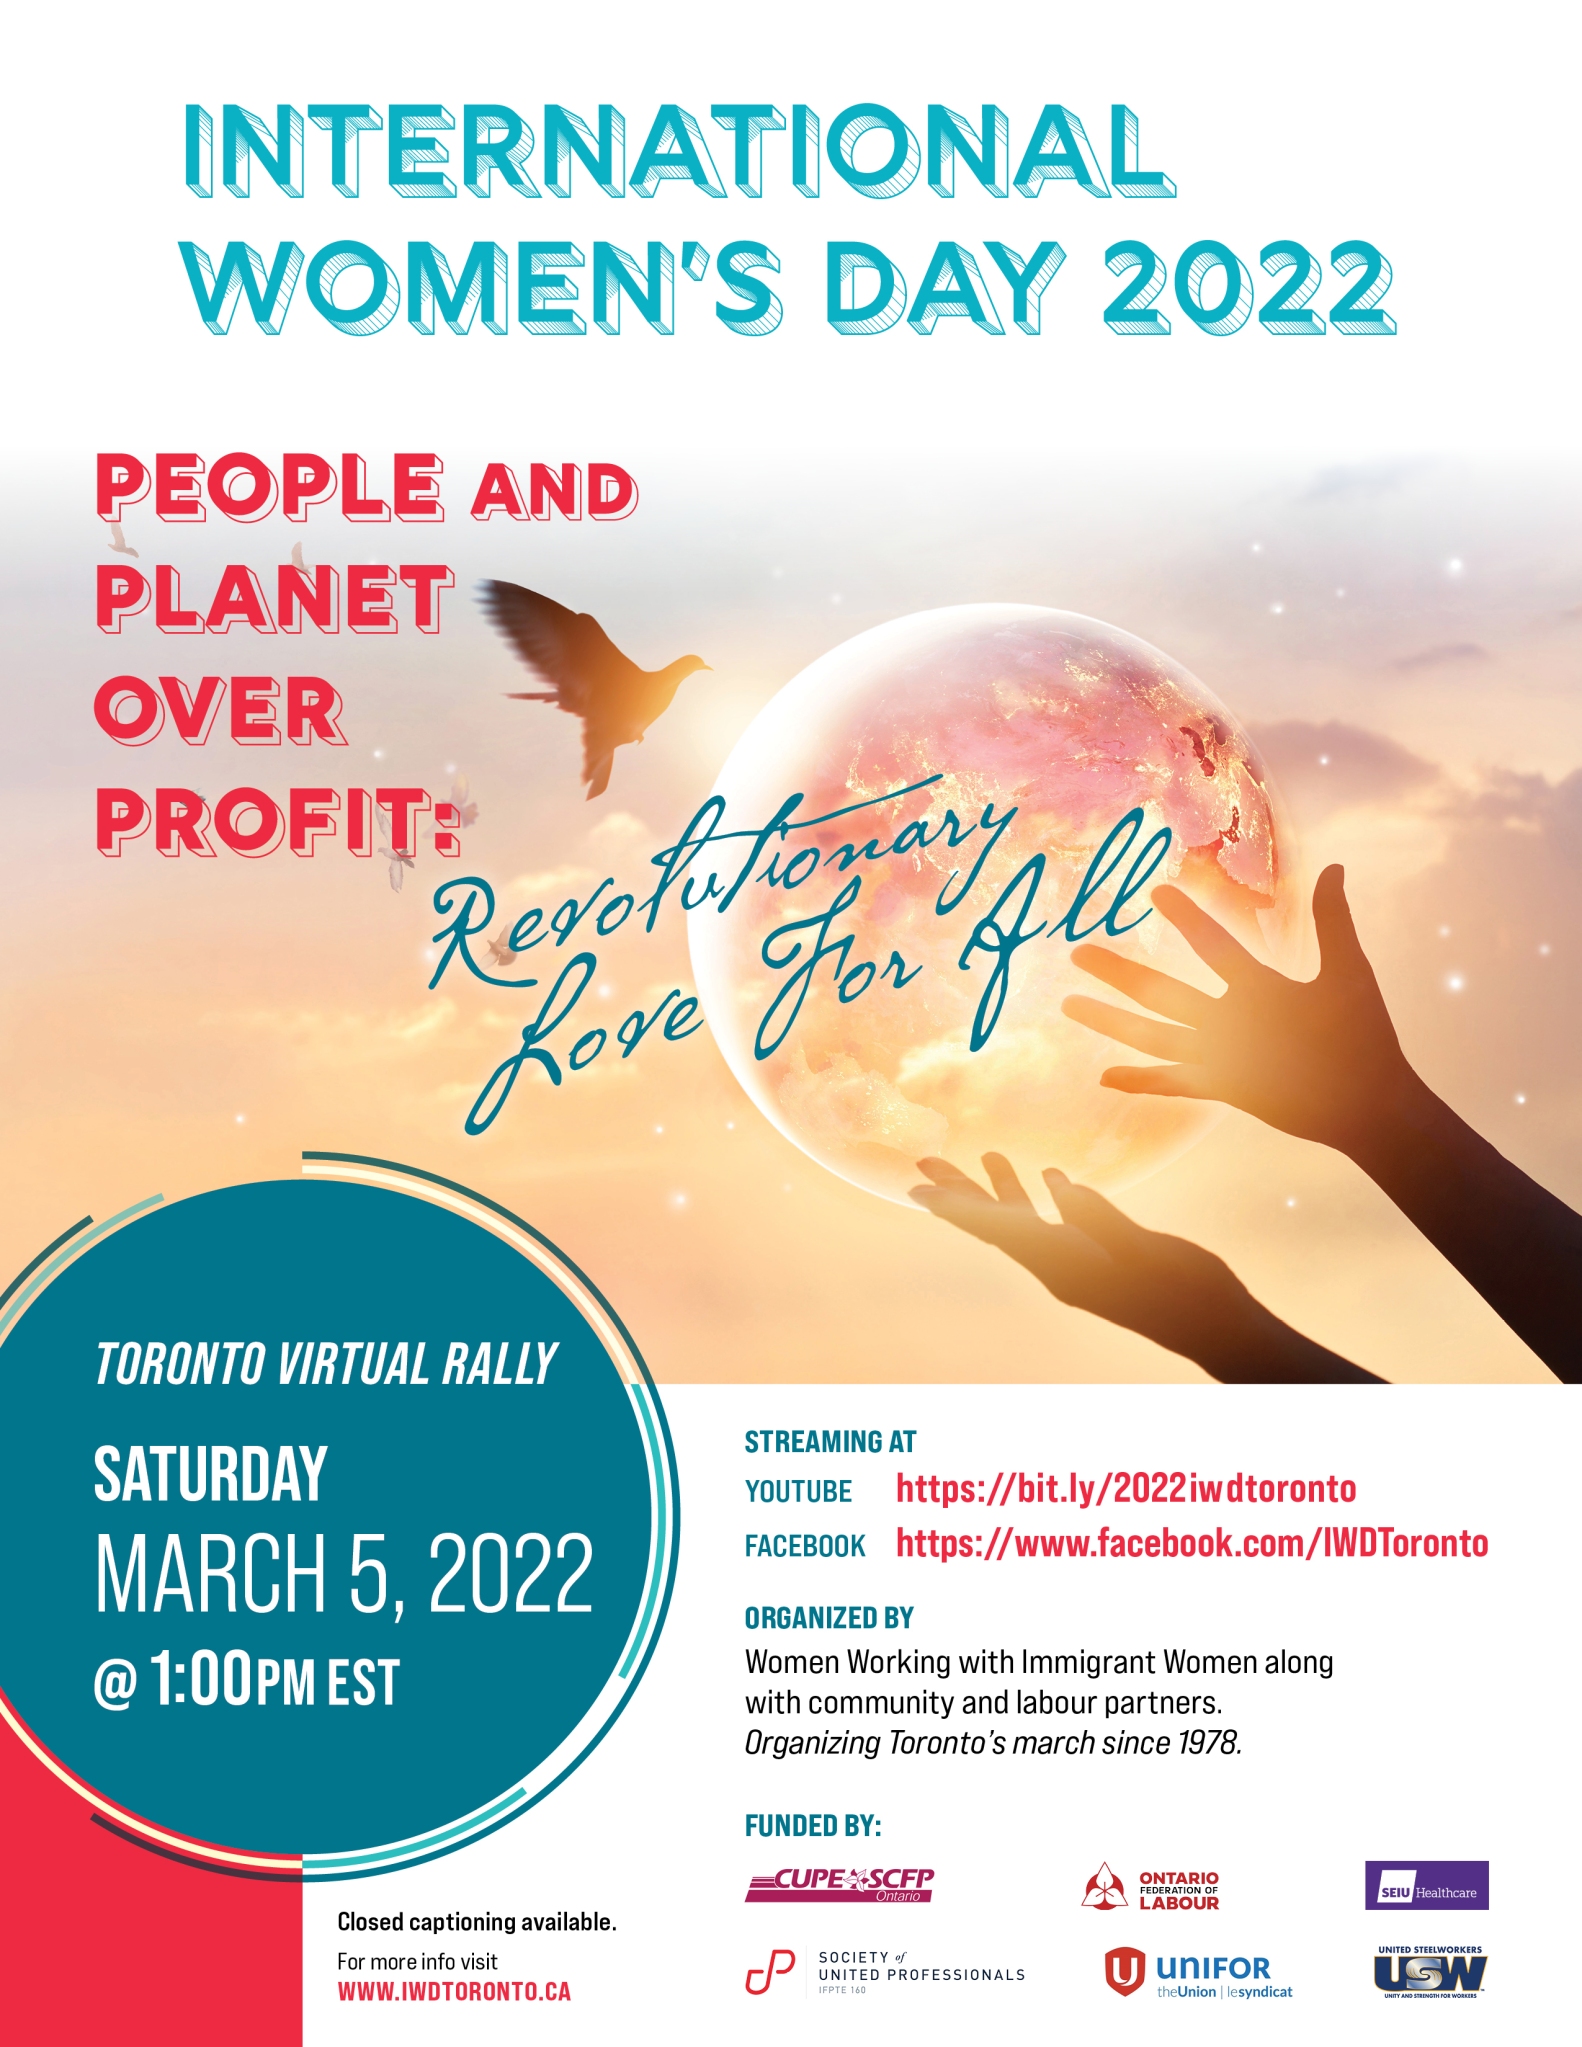 Text reads “International Women’s Day 2022. People and planet over profit: Revolutionary love for all” on the top. The background behind the text is a colour photograph of two human hands holding a radiant Earth like object and a dove flying in the sky. On the bottom left corner, text in a teal coloured circle reads “Toronto virtual rally, Saturday, March 5, 2022 @1:00PM EST.” On the bottom right corner, text reads “Streaming at Facebook: https://www.facebook.com/IWDToronto, YouTube: https://bit.ly/2022iwdt